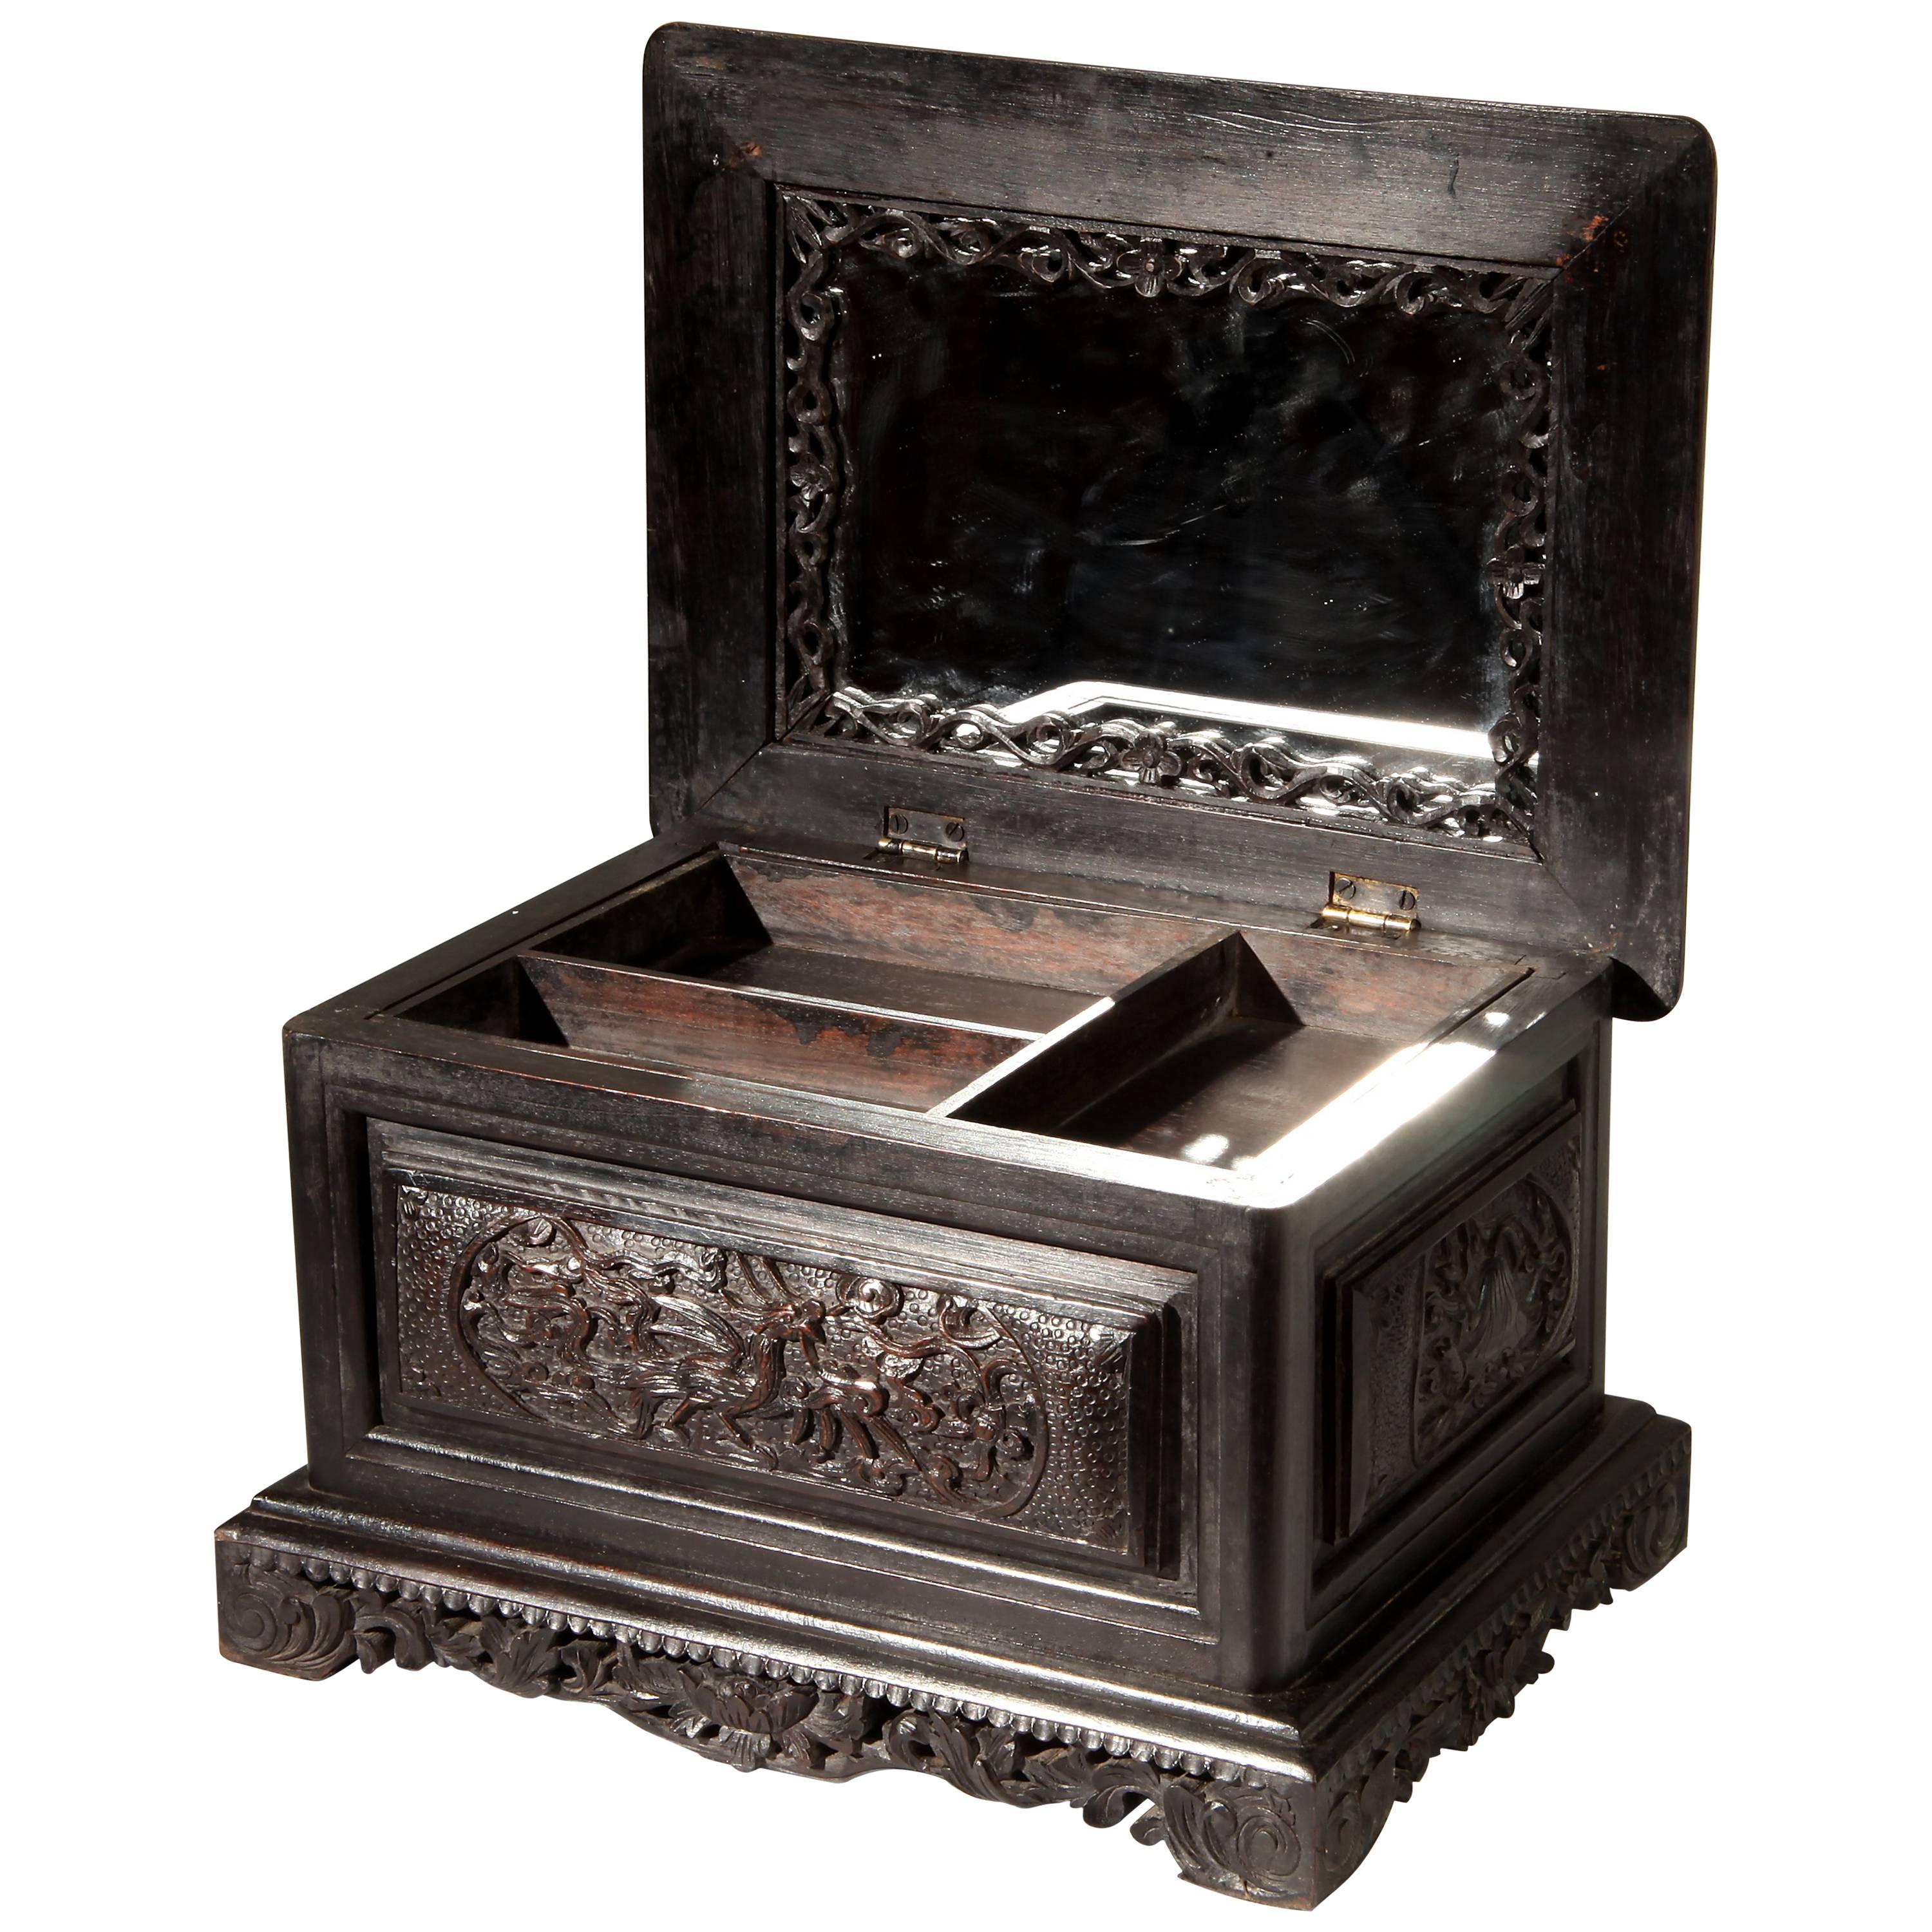 Carved Jewelry Box with Mirror and Storage